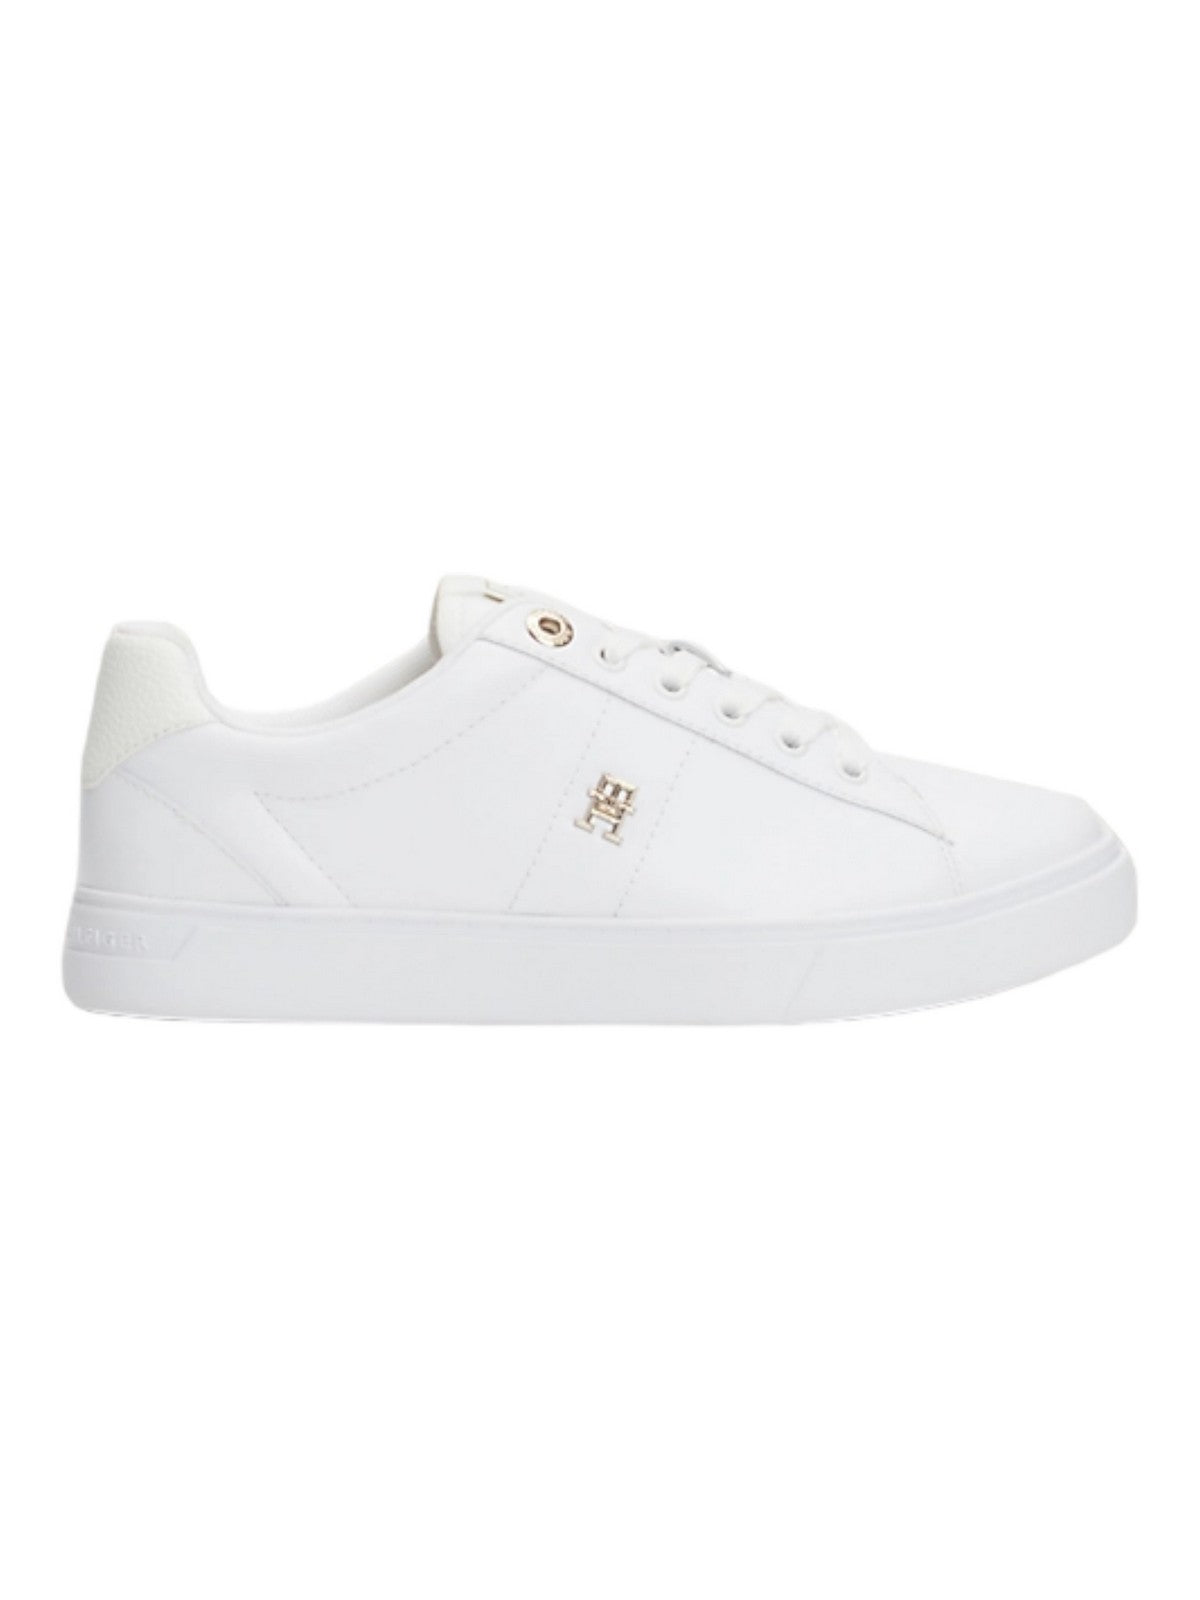 TOMMY HILFIGER Sneaker Donna  FW0FW07685 YBS Bianco